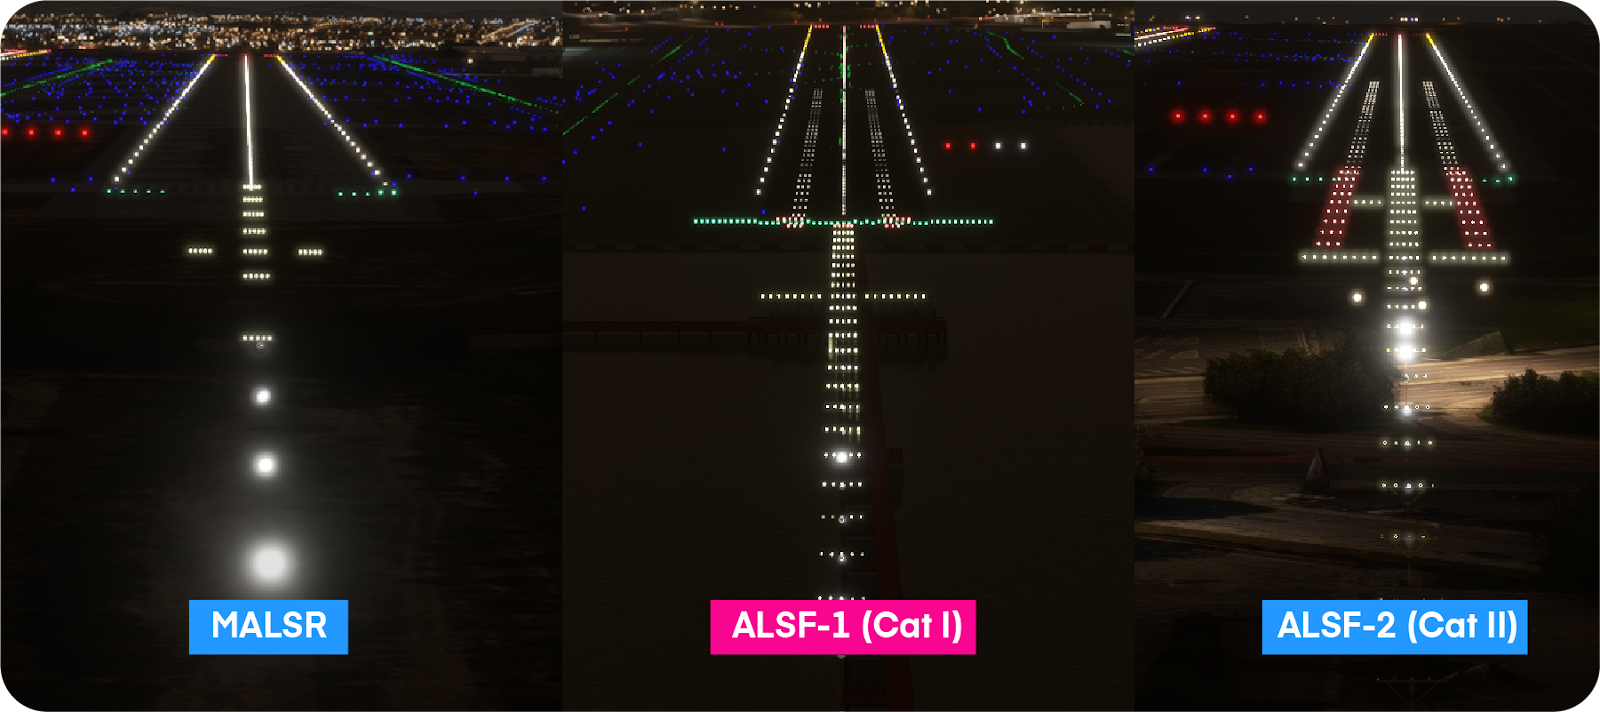 Three types of approach lights: MALSR, ALSF-1, and ALSF-2.